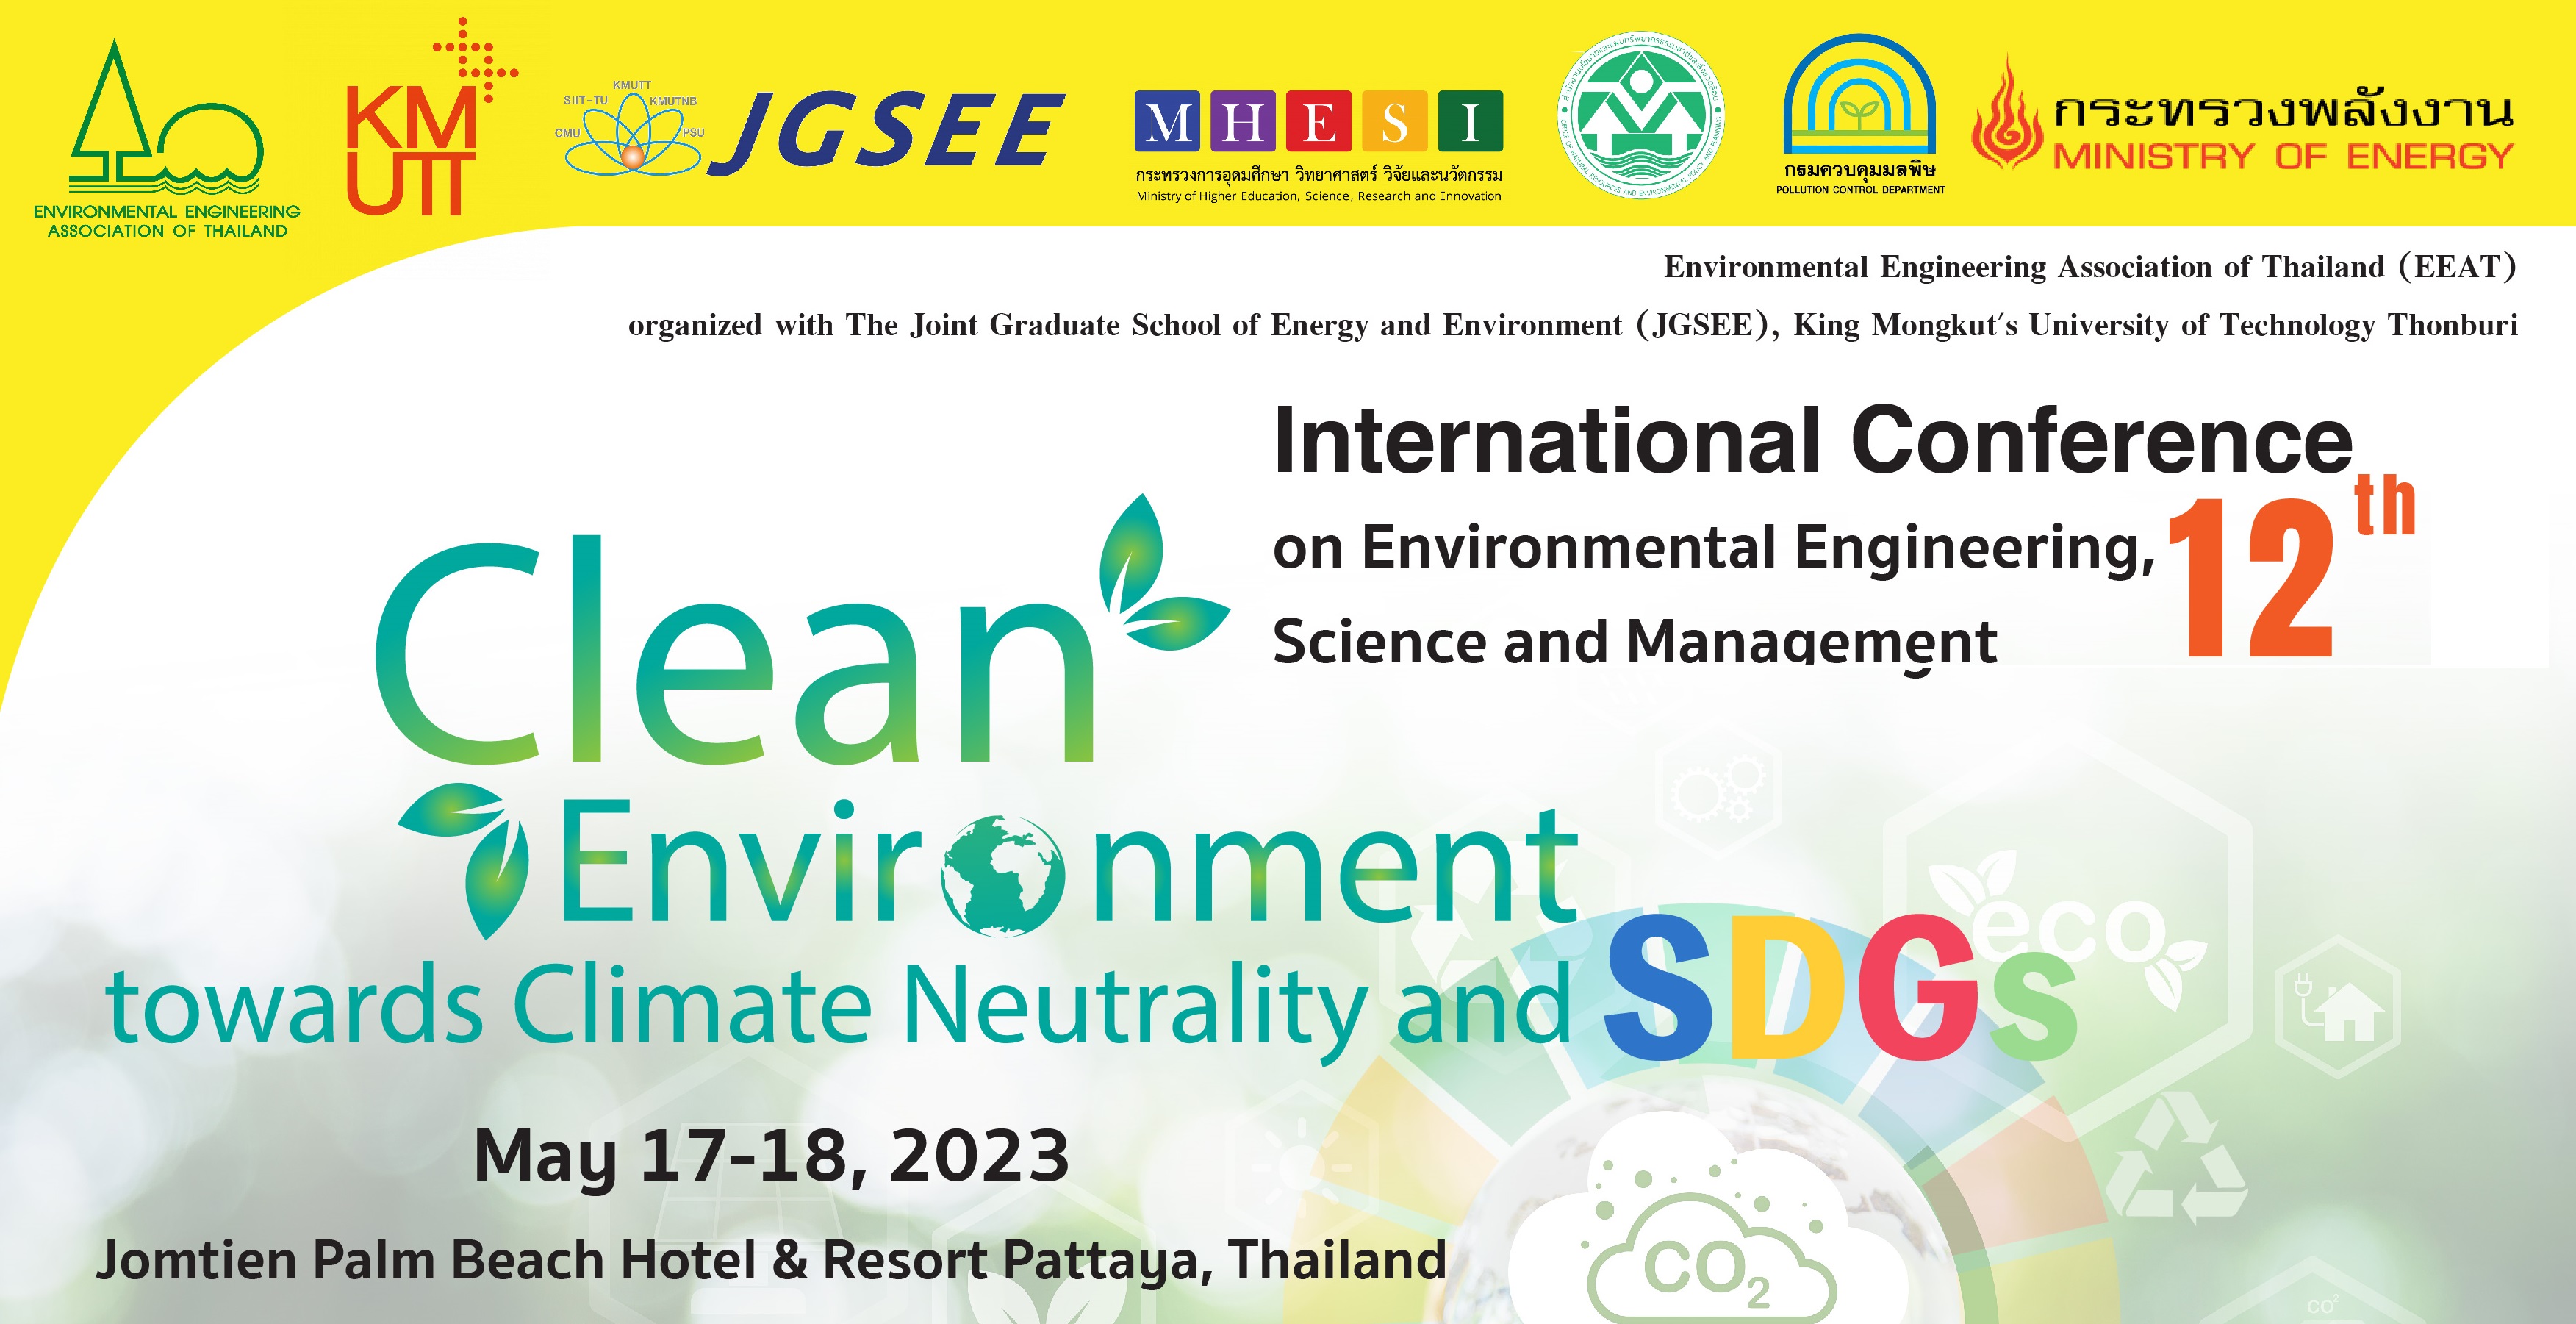 The 12th International Conference on Environmental Engineering, Science and Management